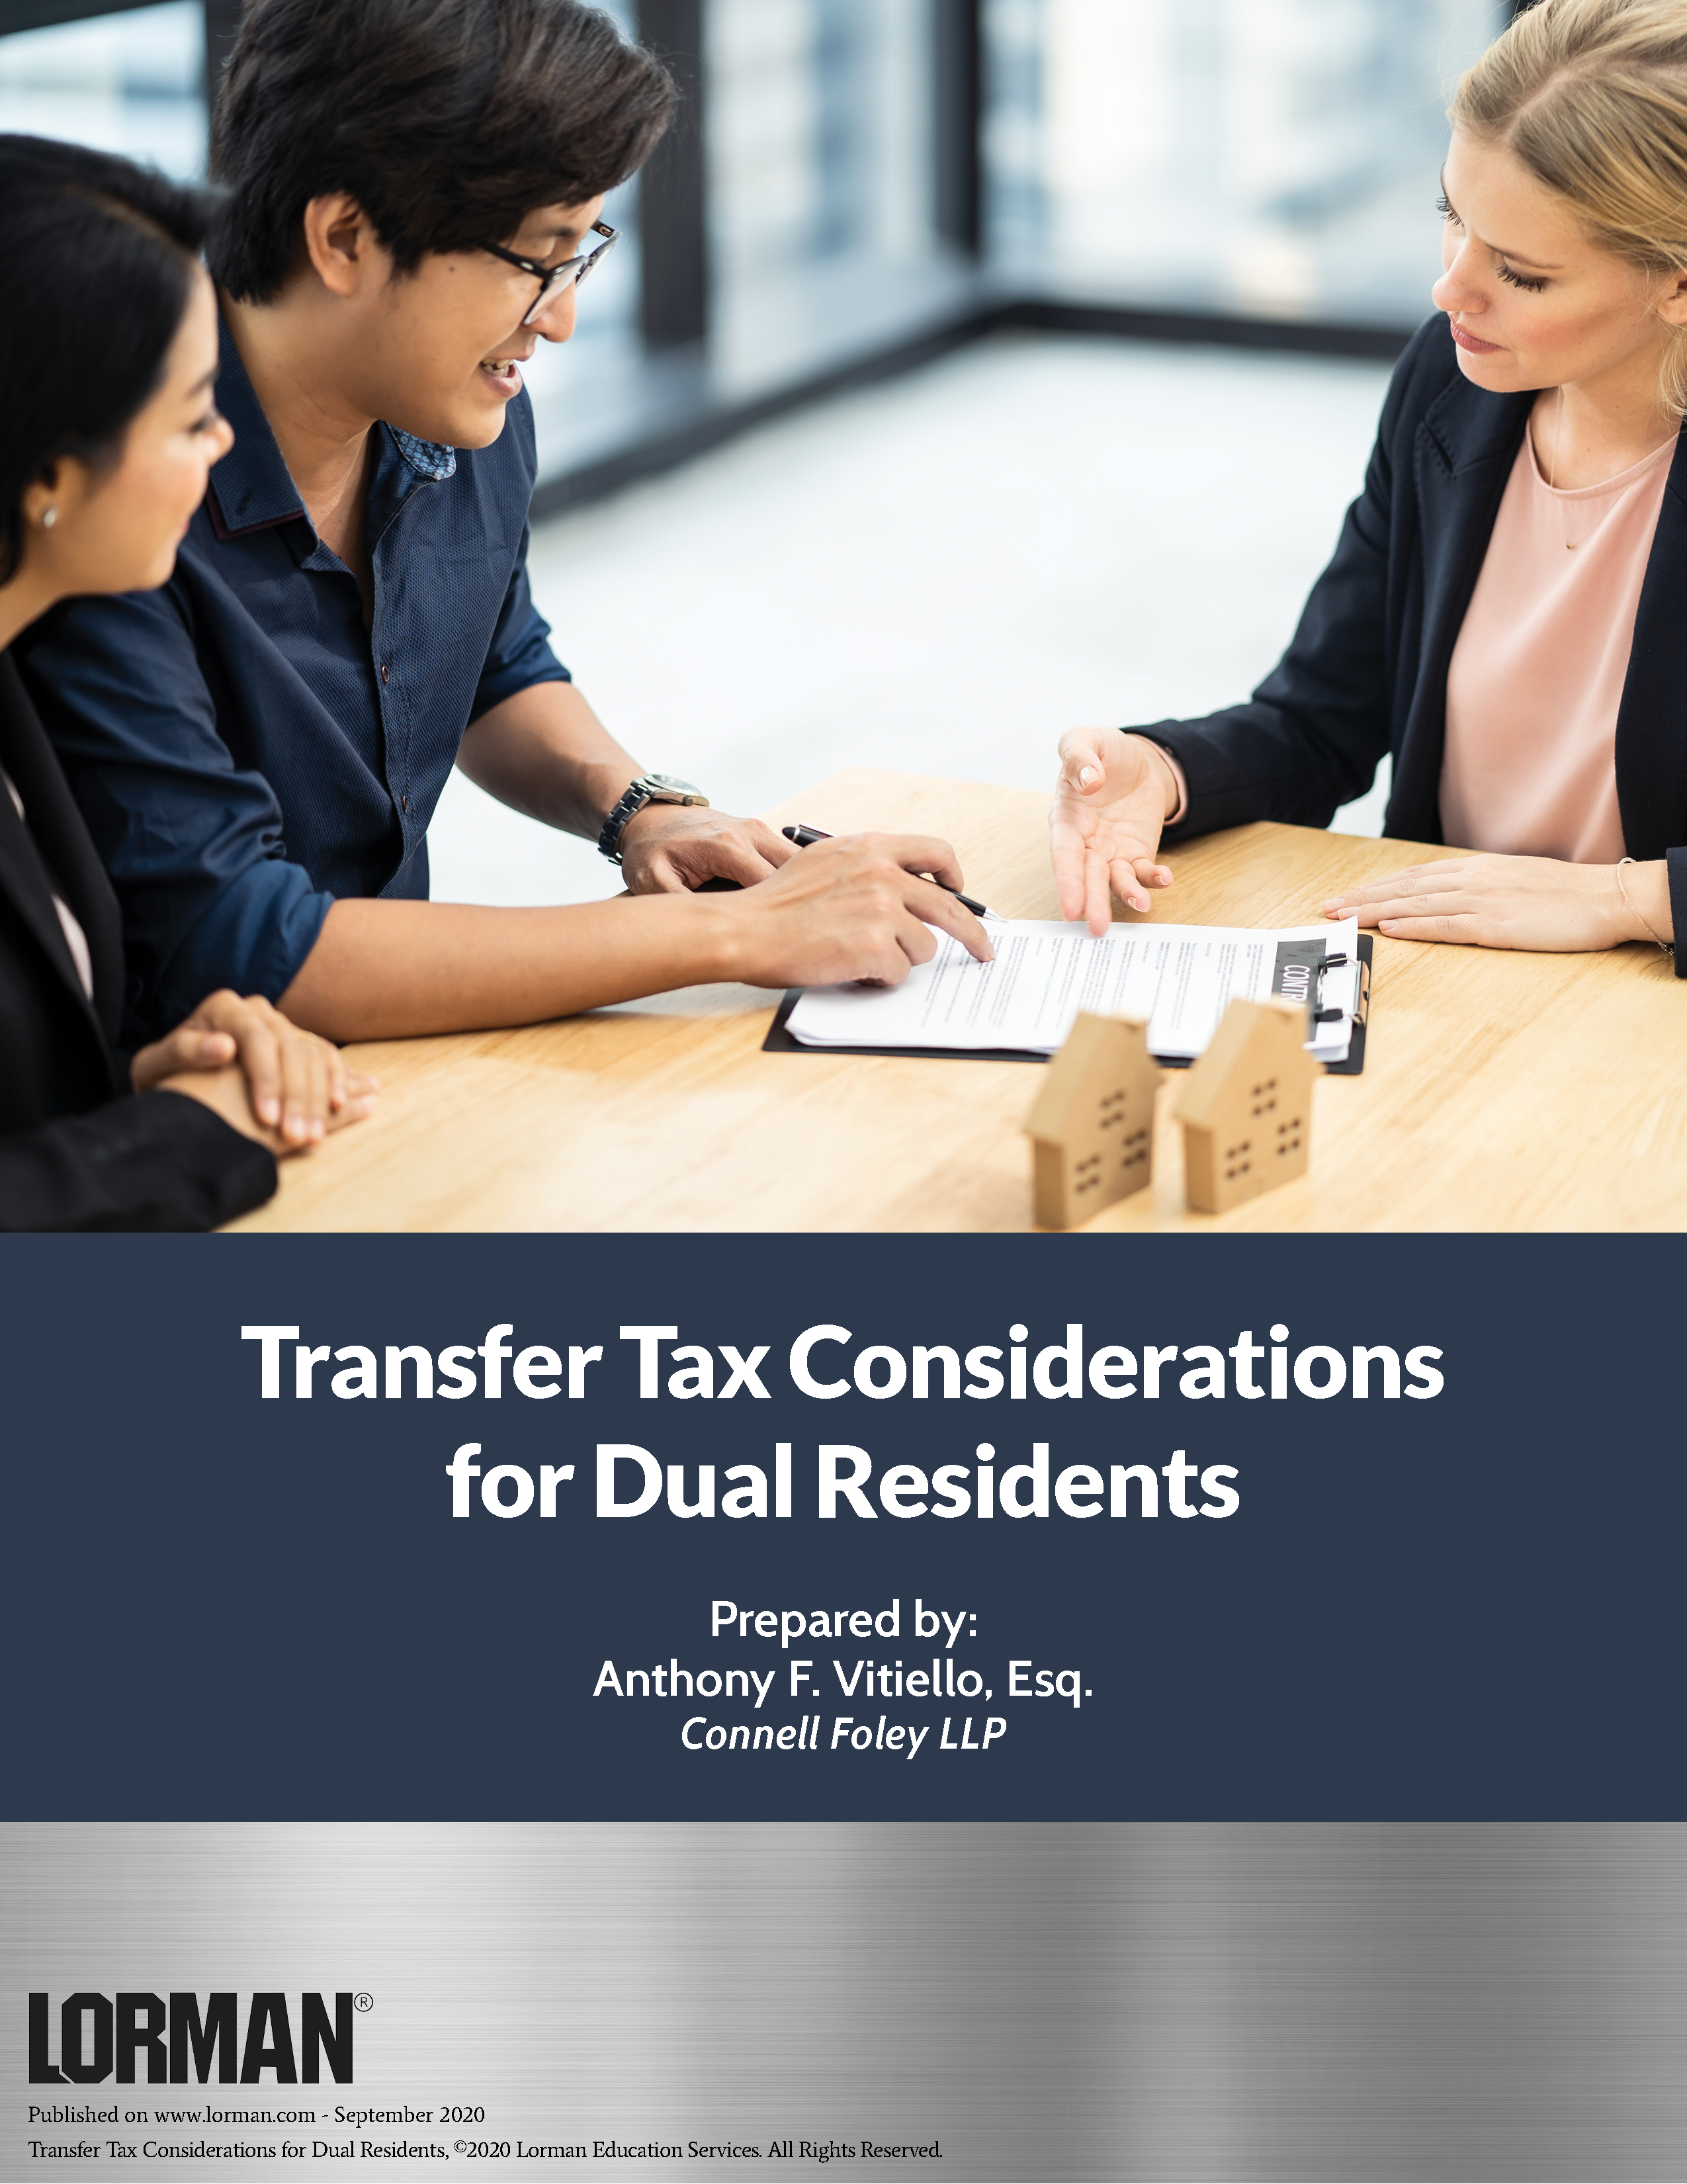 Transfer Tax Considerations for Dual Residents